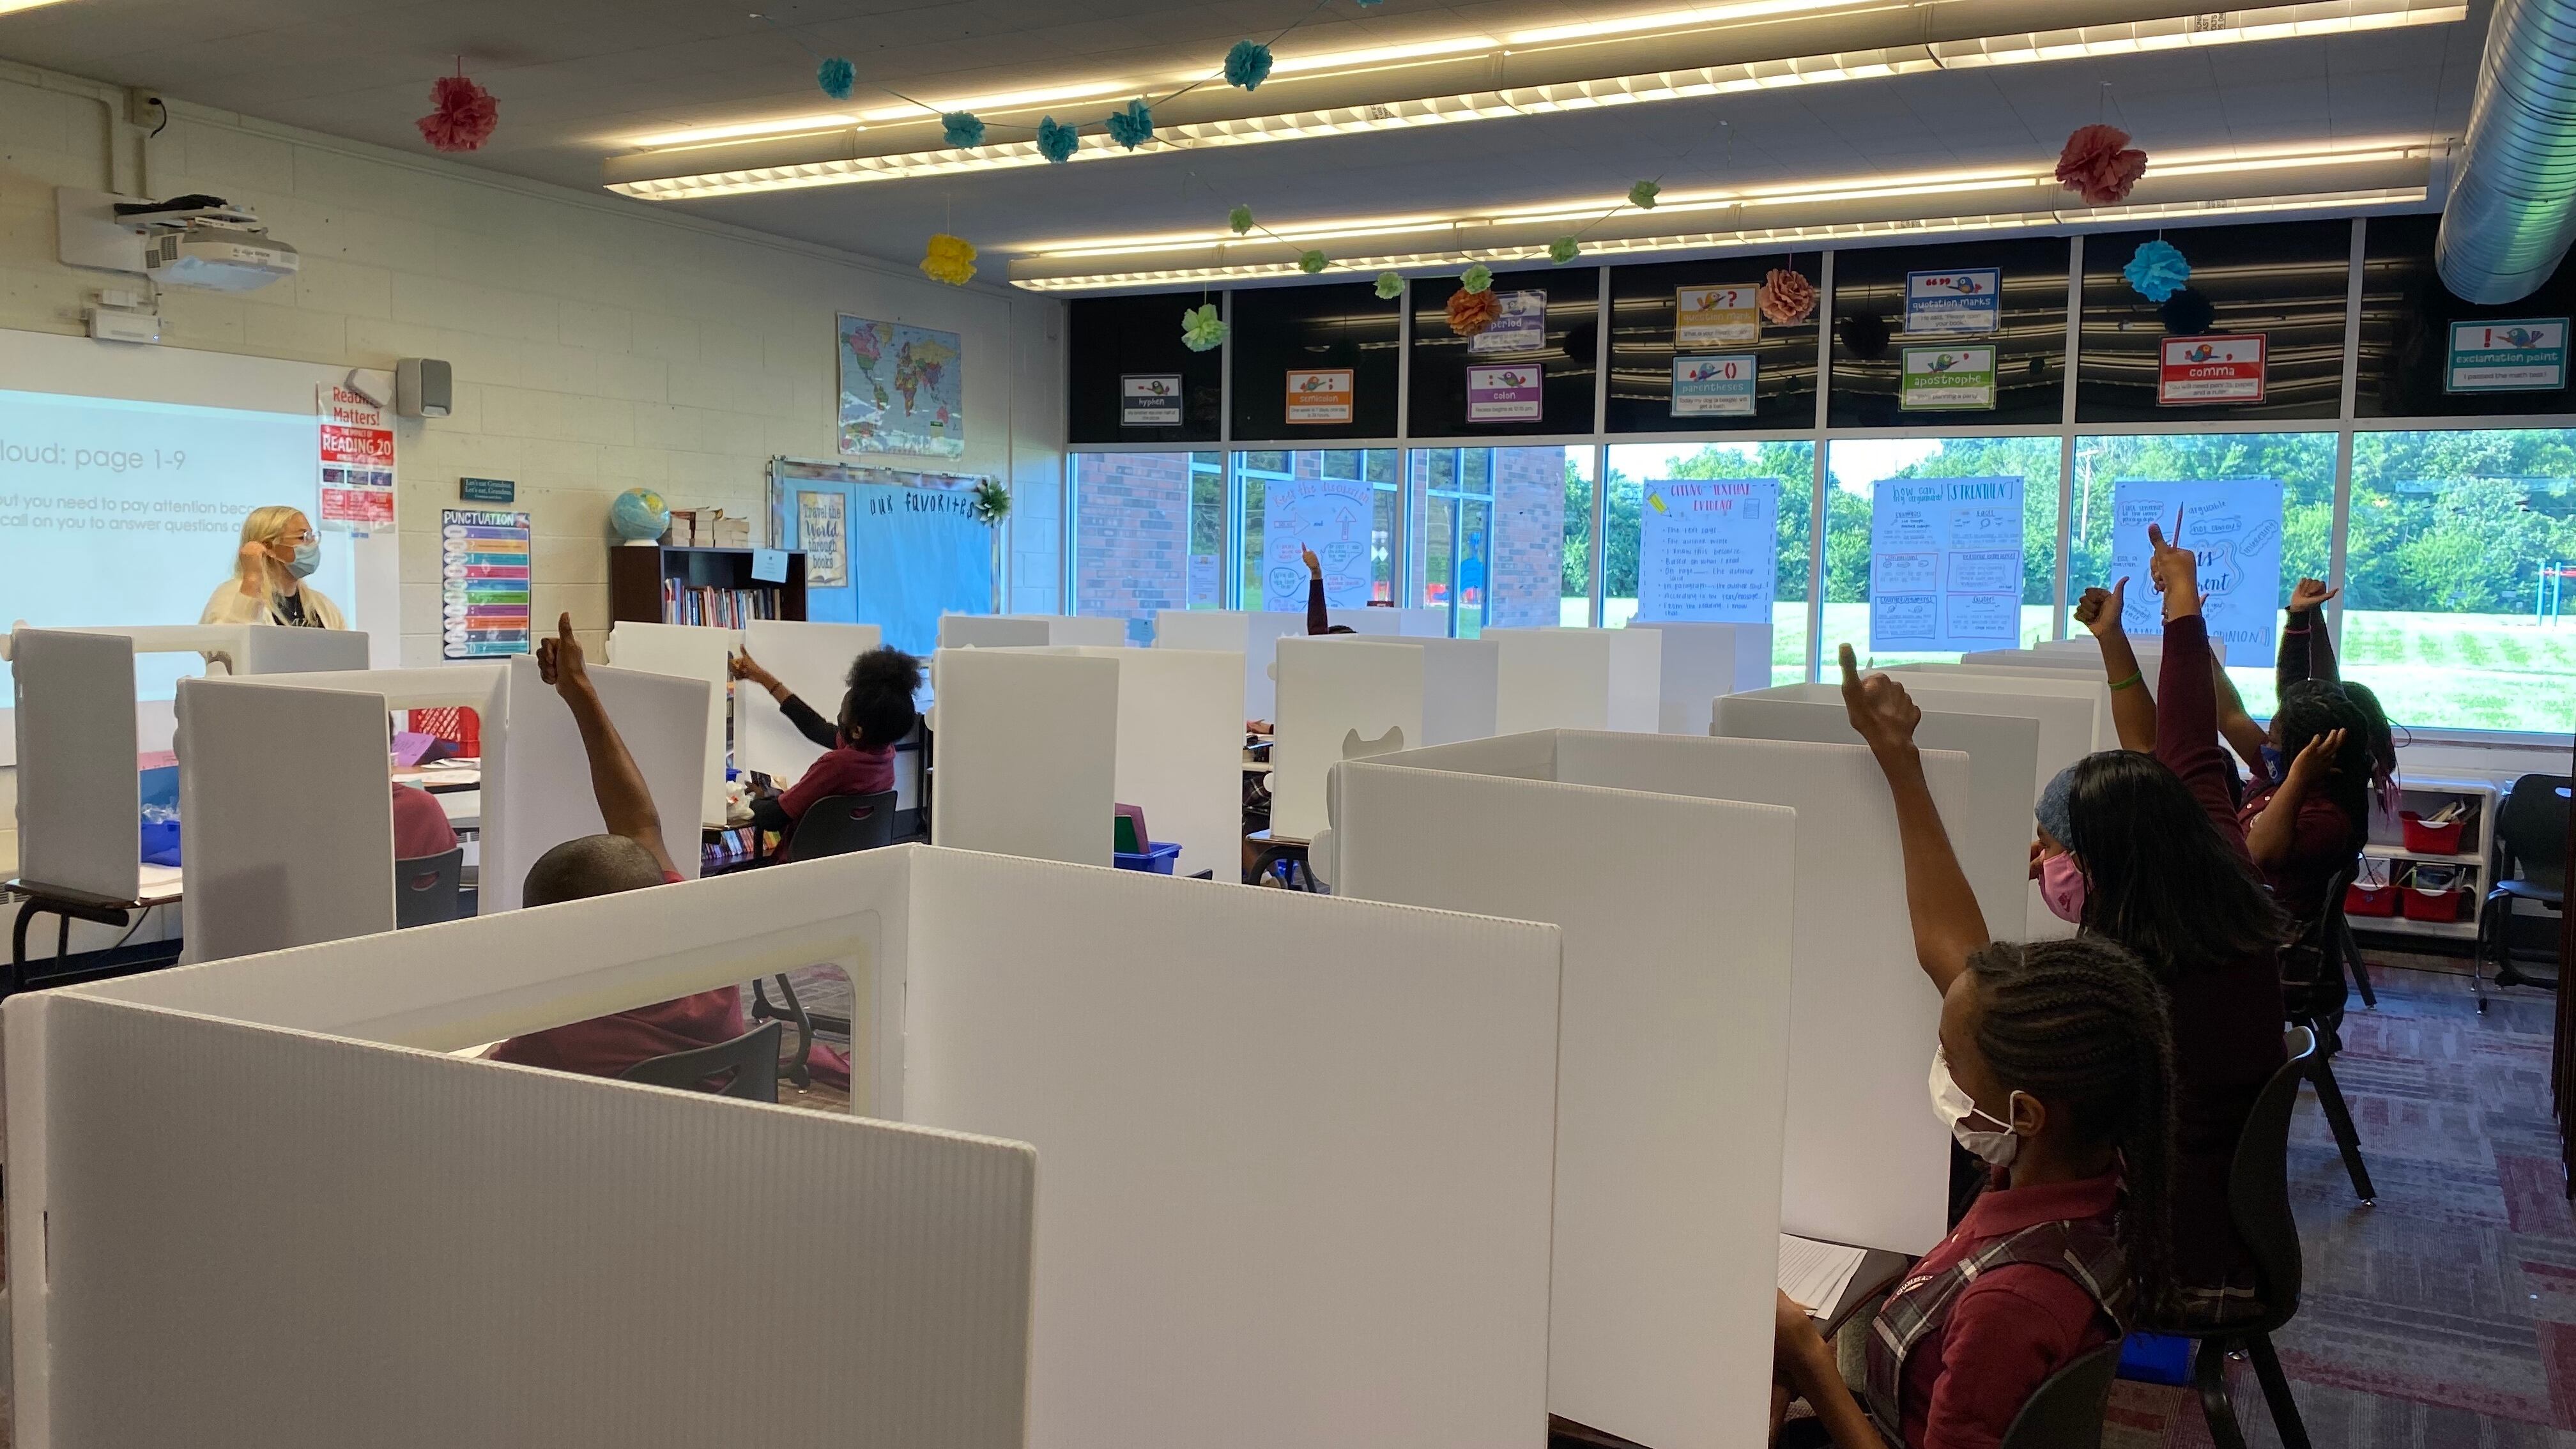 Students separated by partitions raise their hands during class. The teacher stands at the front. 